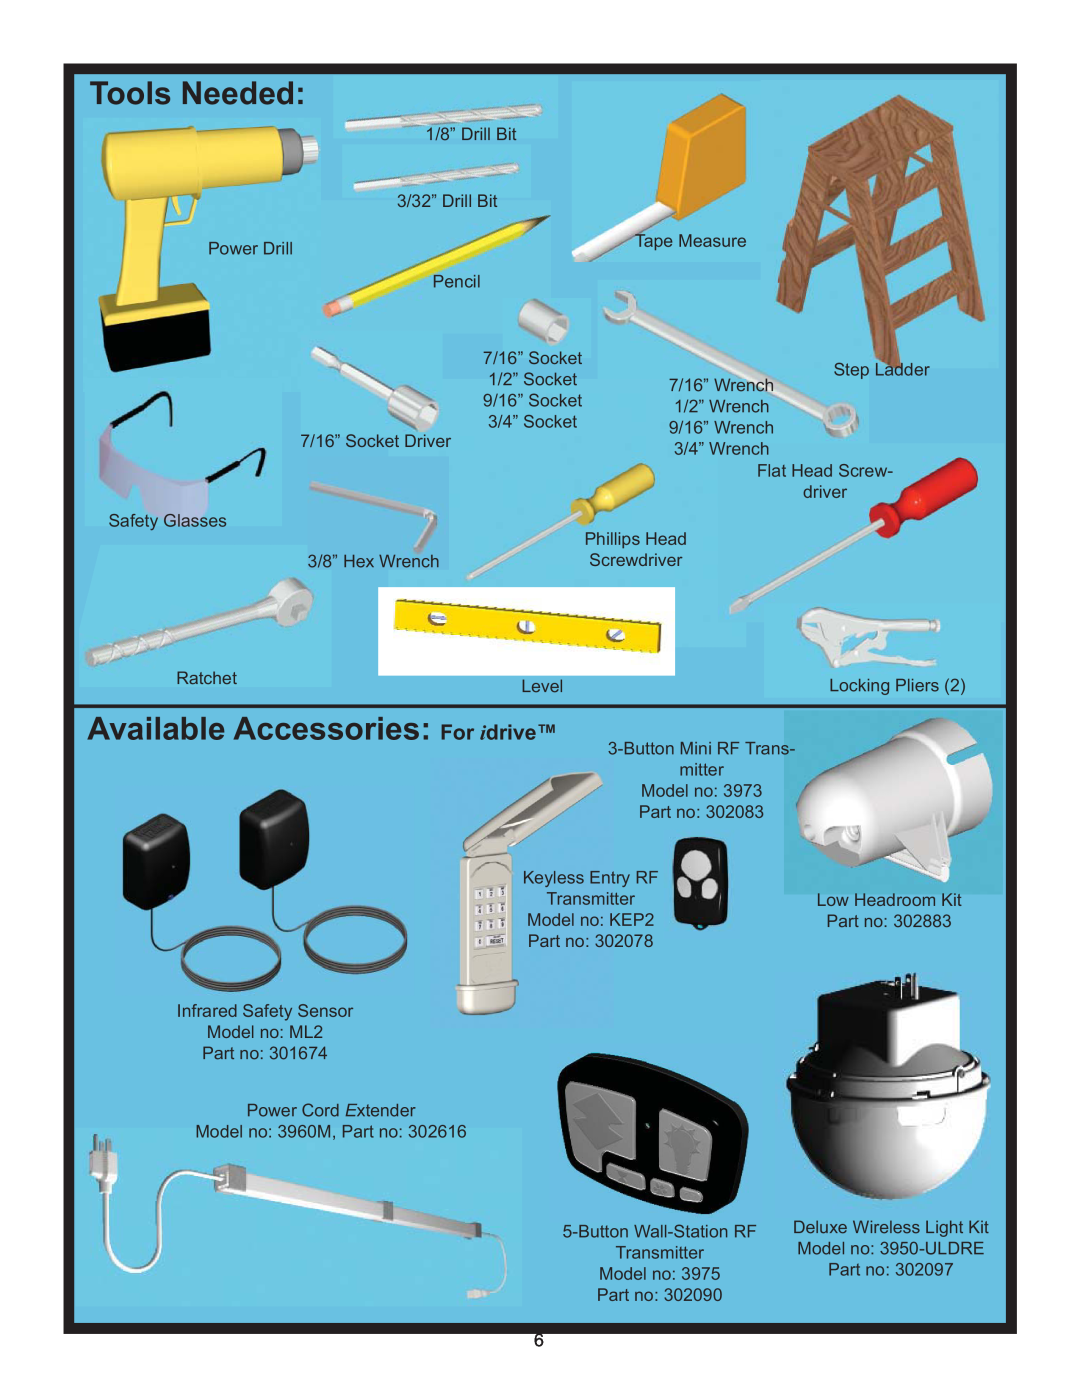 Wayne-Dalton 3982 installation instructions Tools Needed, Available Accessories: For idrive 